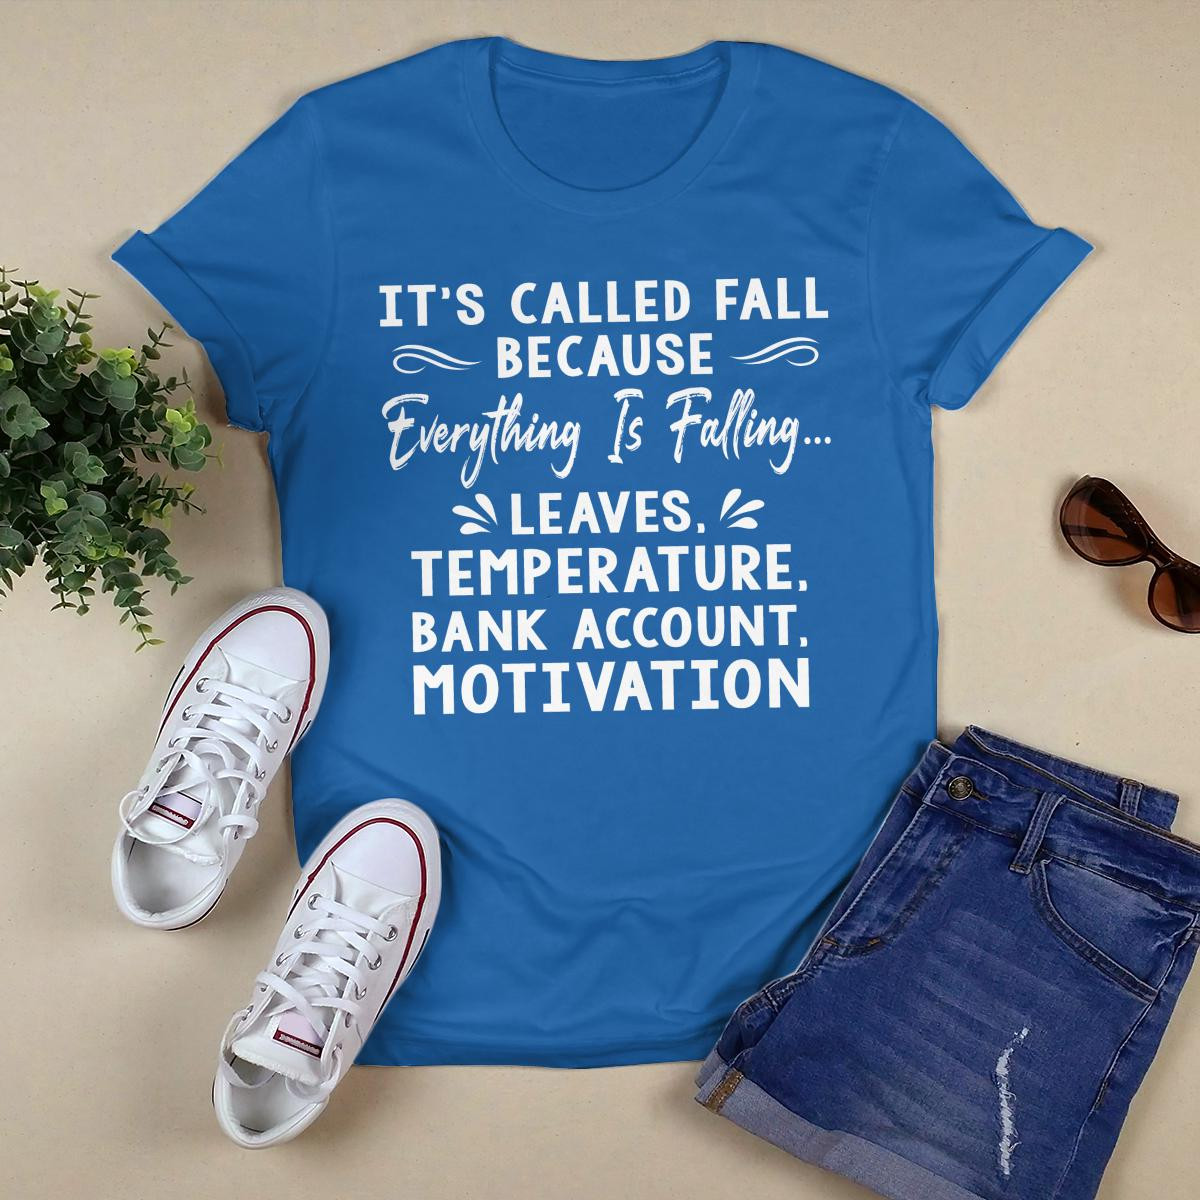 It_s Called Fall shirt